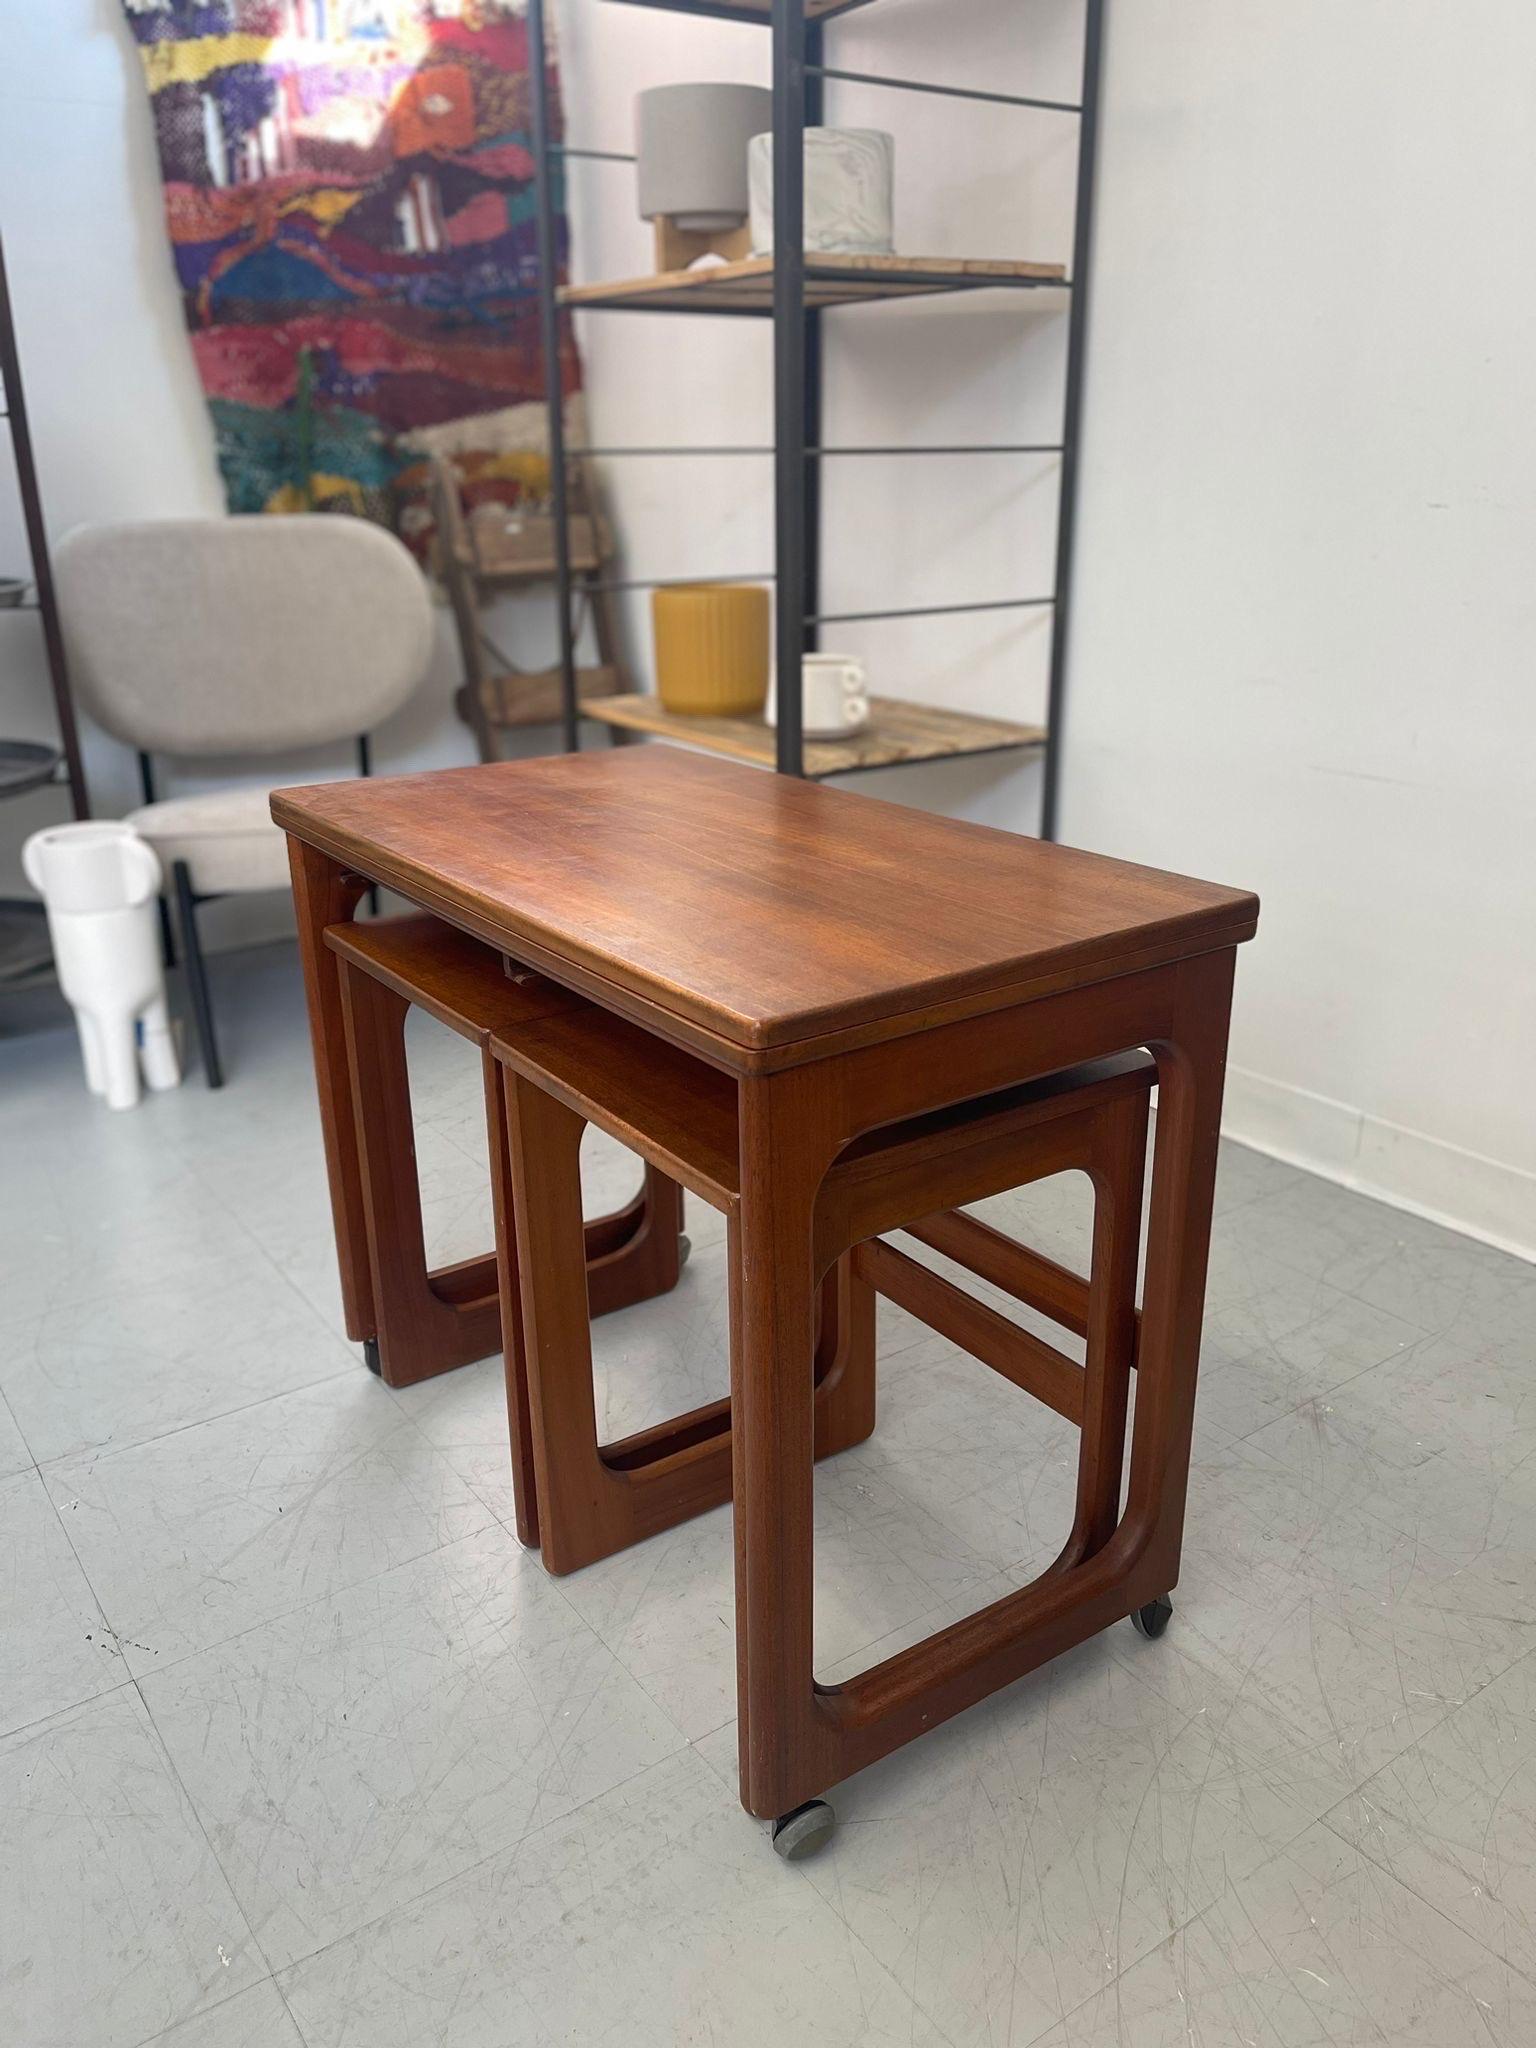 Vintage Danish Modern Nesting Table With Flip Top Uk Import In Good Condition For Sale In Seattle, WA